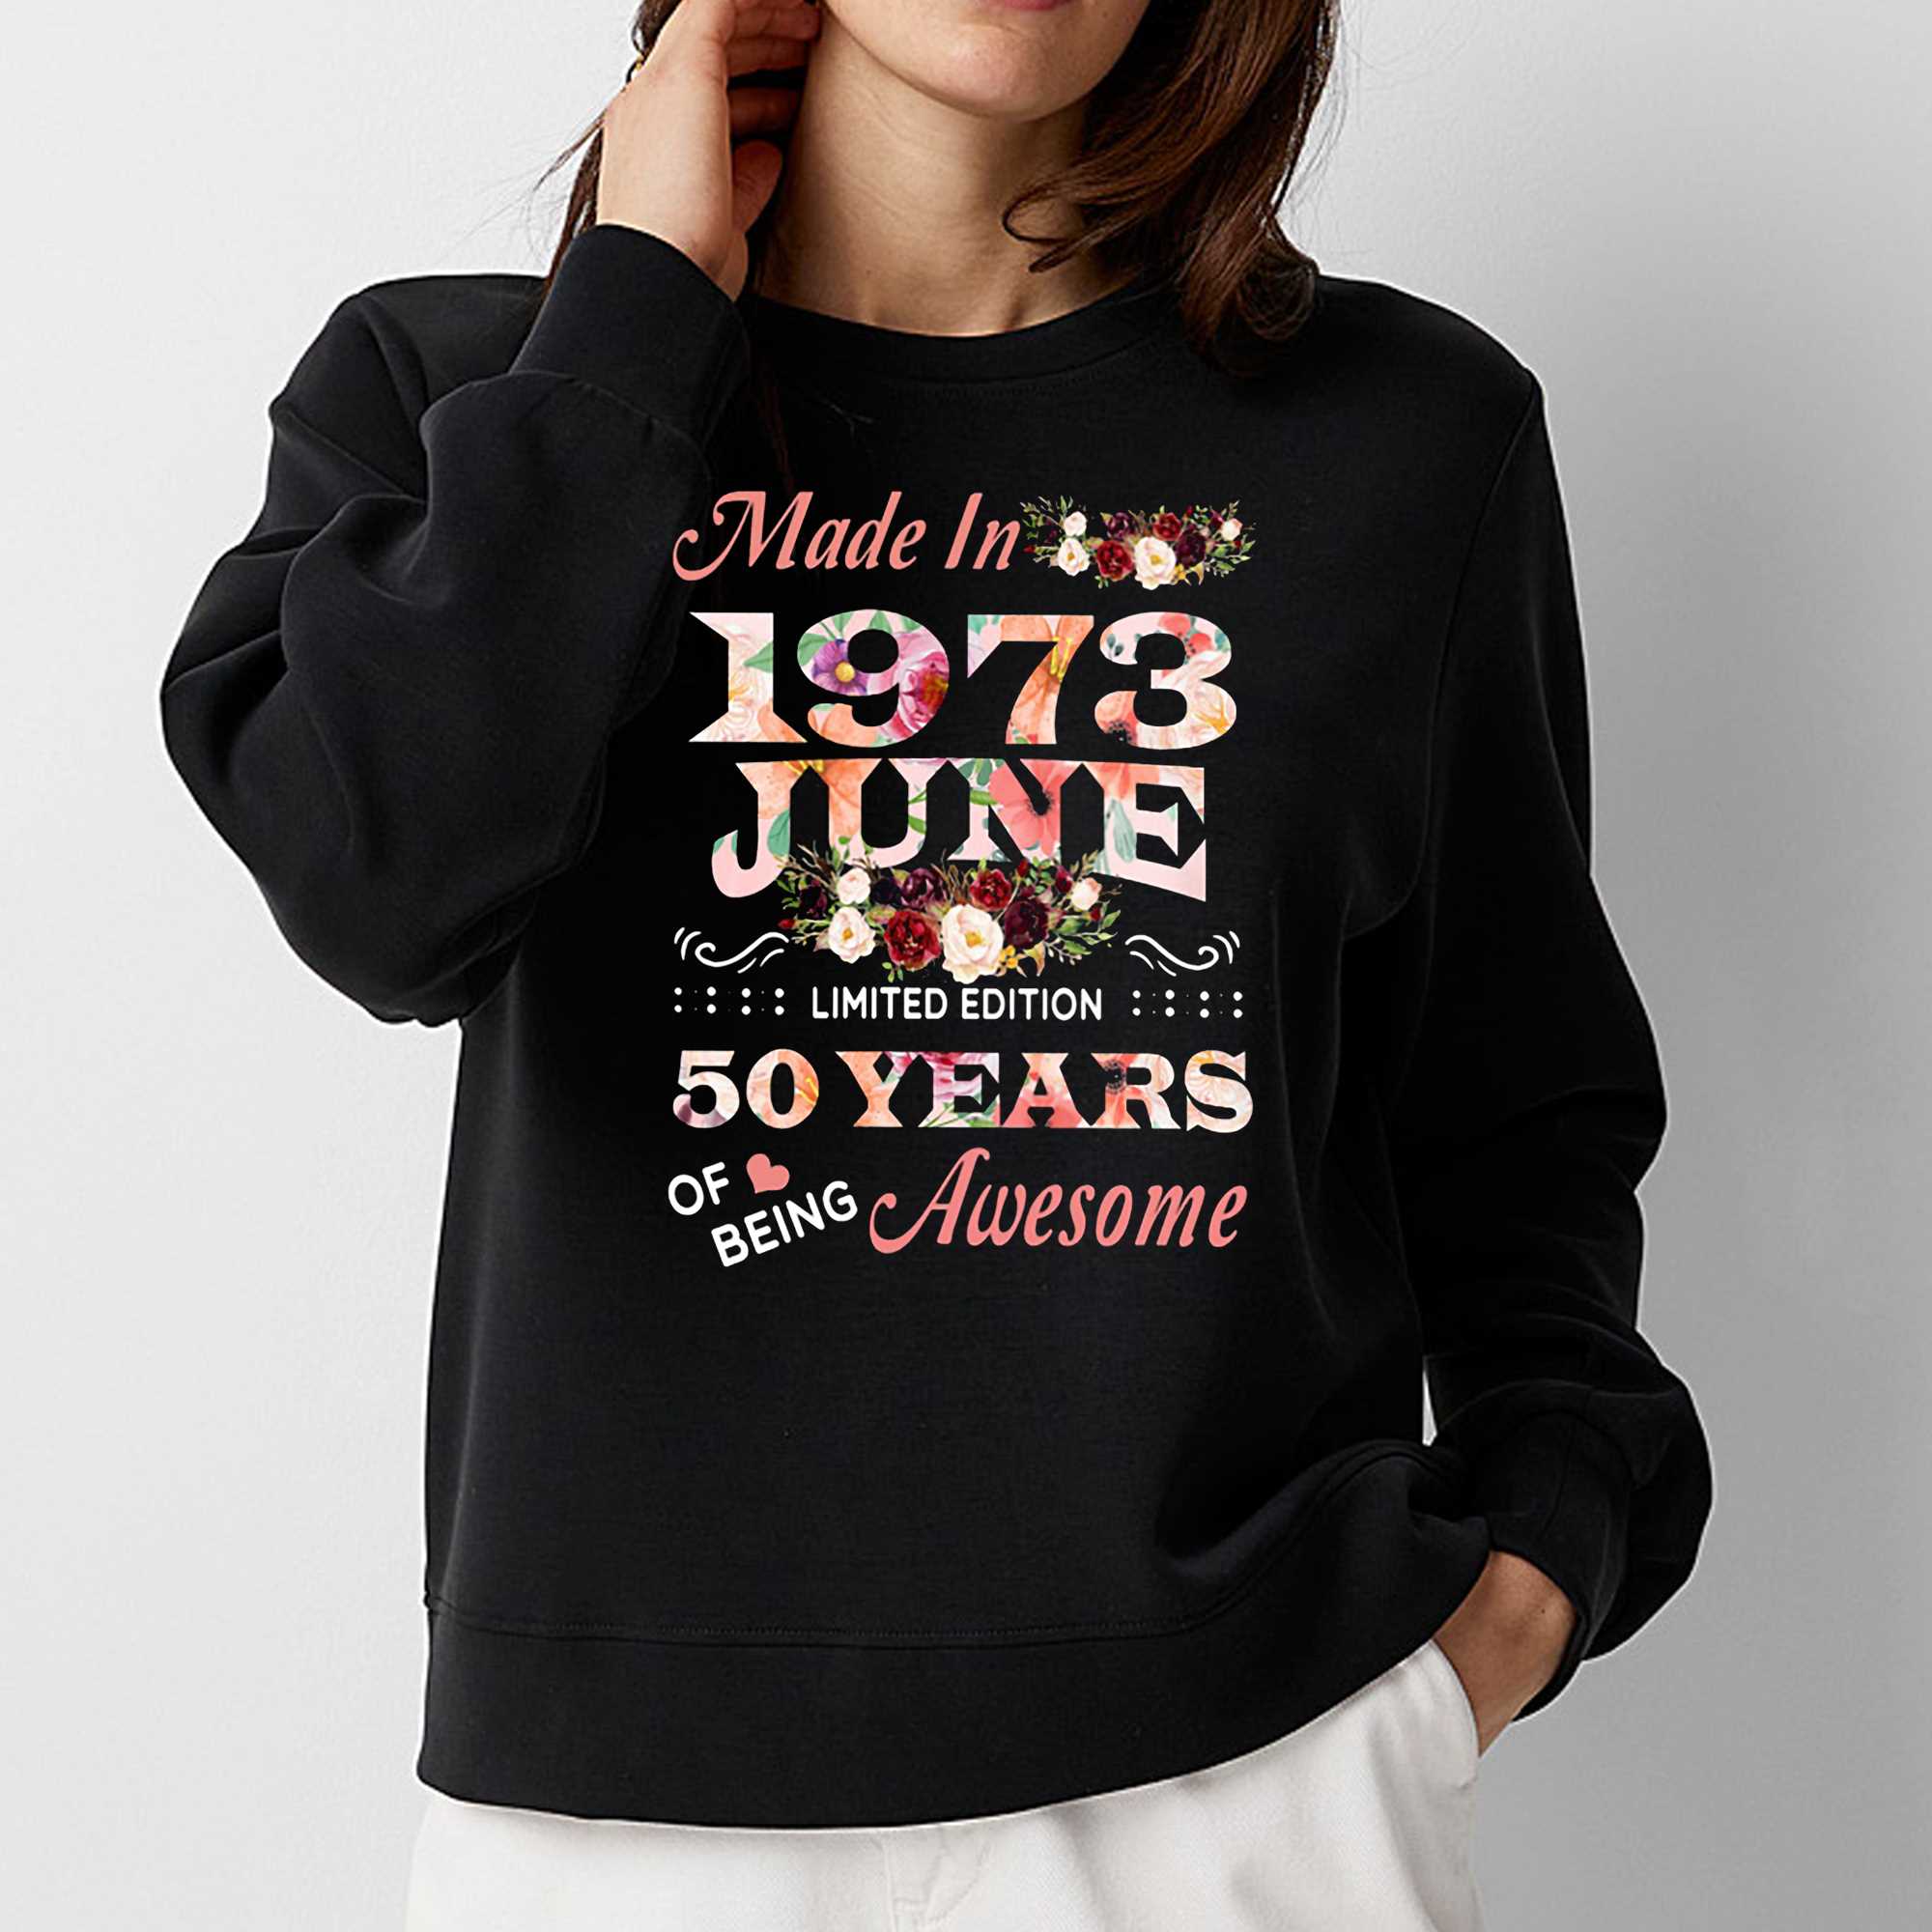 Made In June 1973 50 Years Of Being Awesome Shirt Sweatshirt 